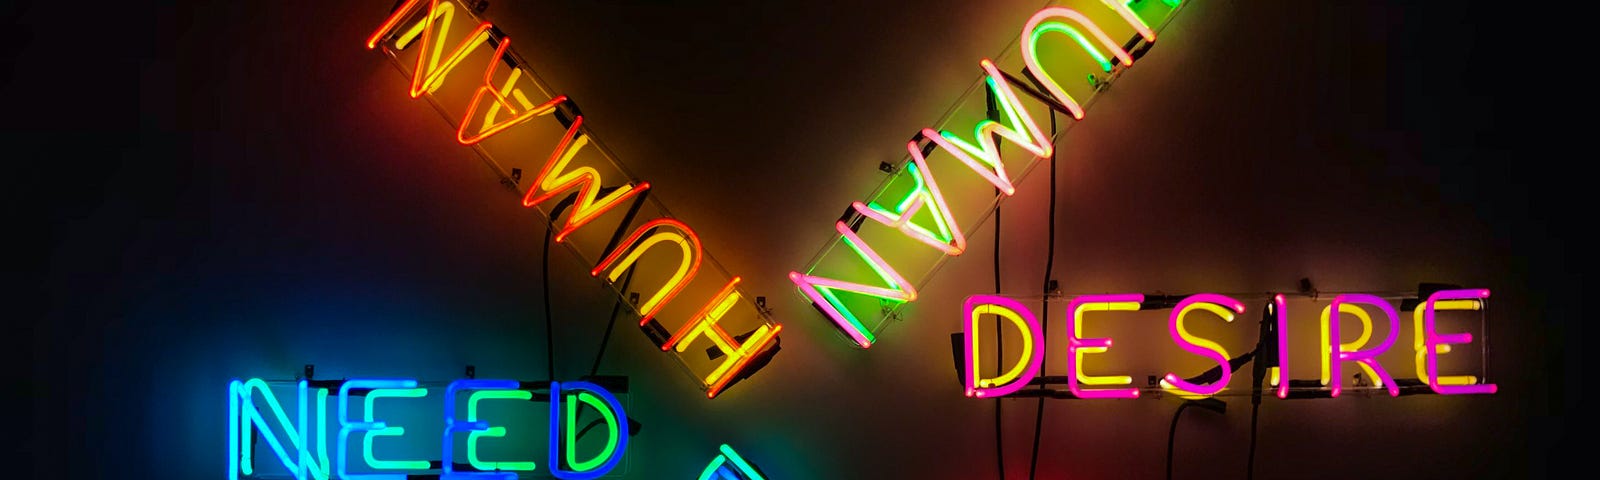 A colourful neon display forms a star pattern against a black background, featuring the words: Need, Human, Desire and Hope.